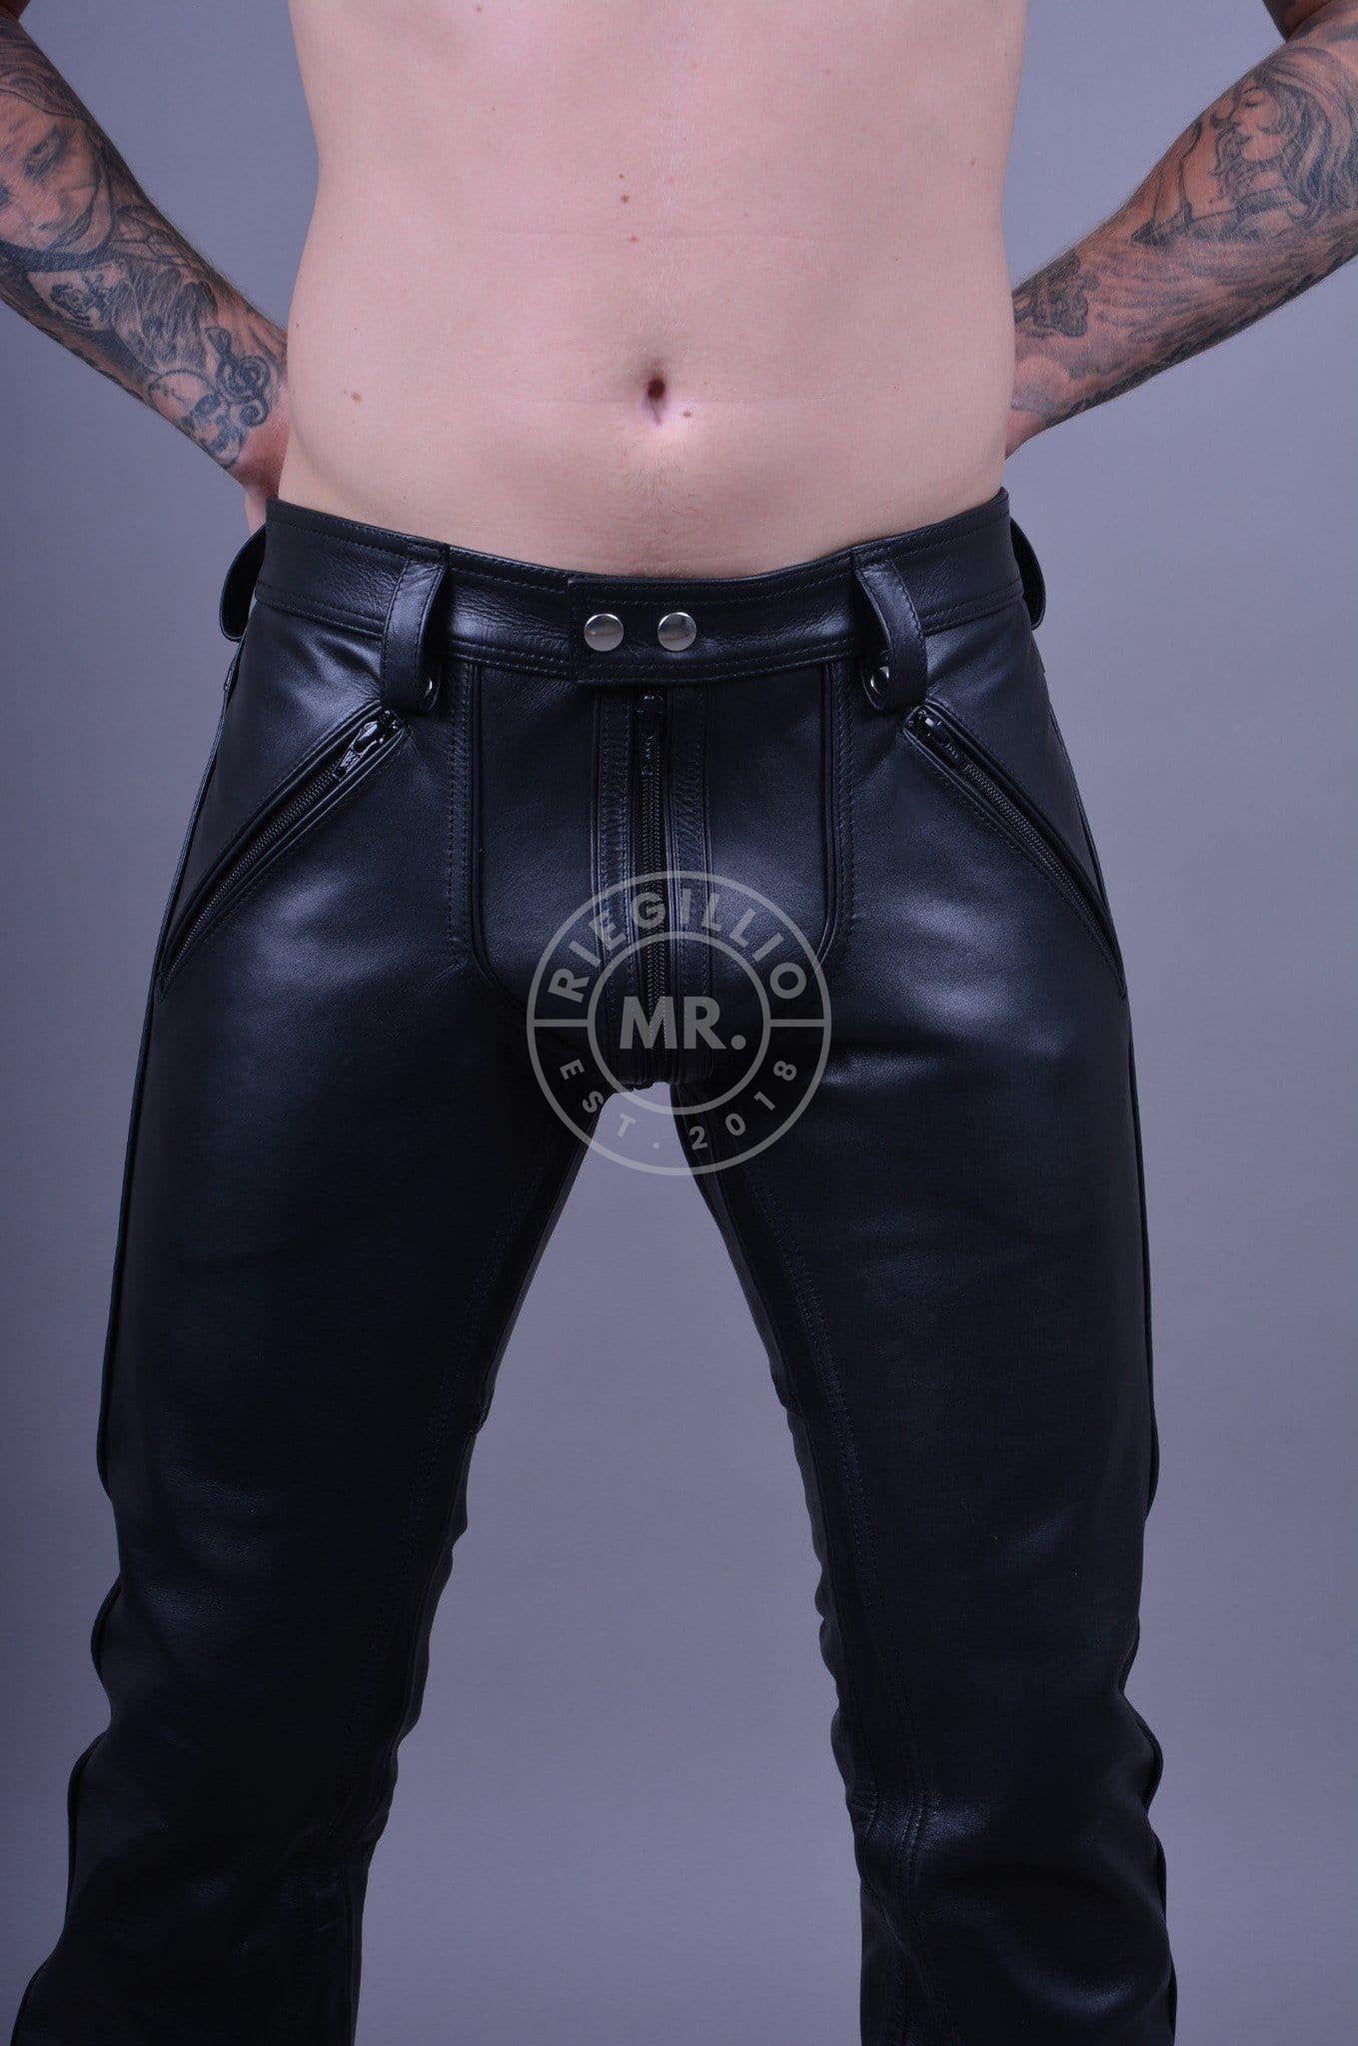 Black Sexy Latex Leggings With Crotch And Calf Bottom Zippers Open